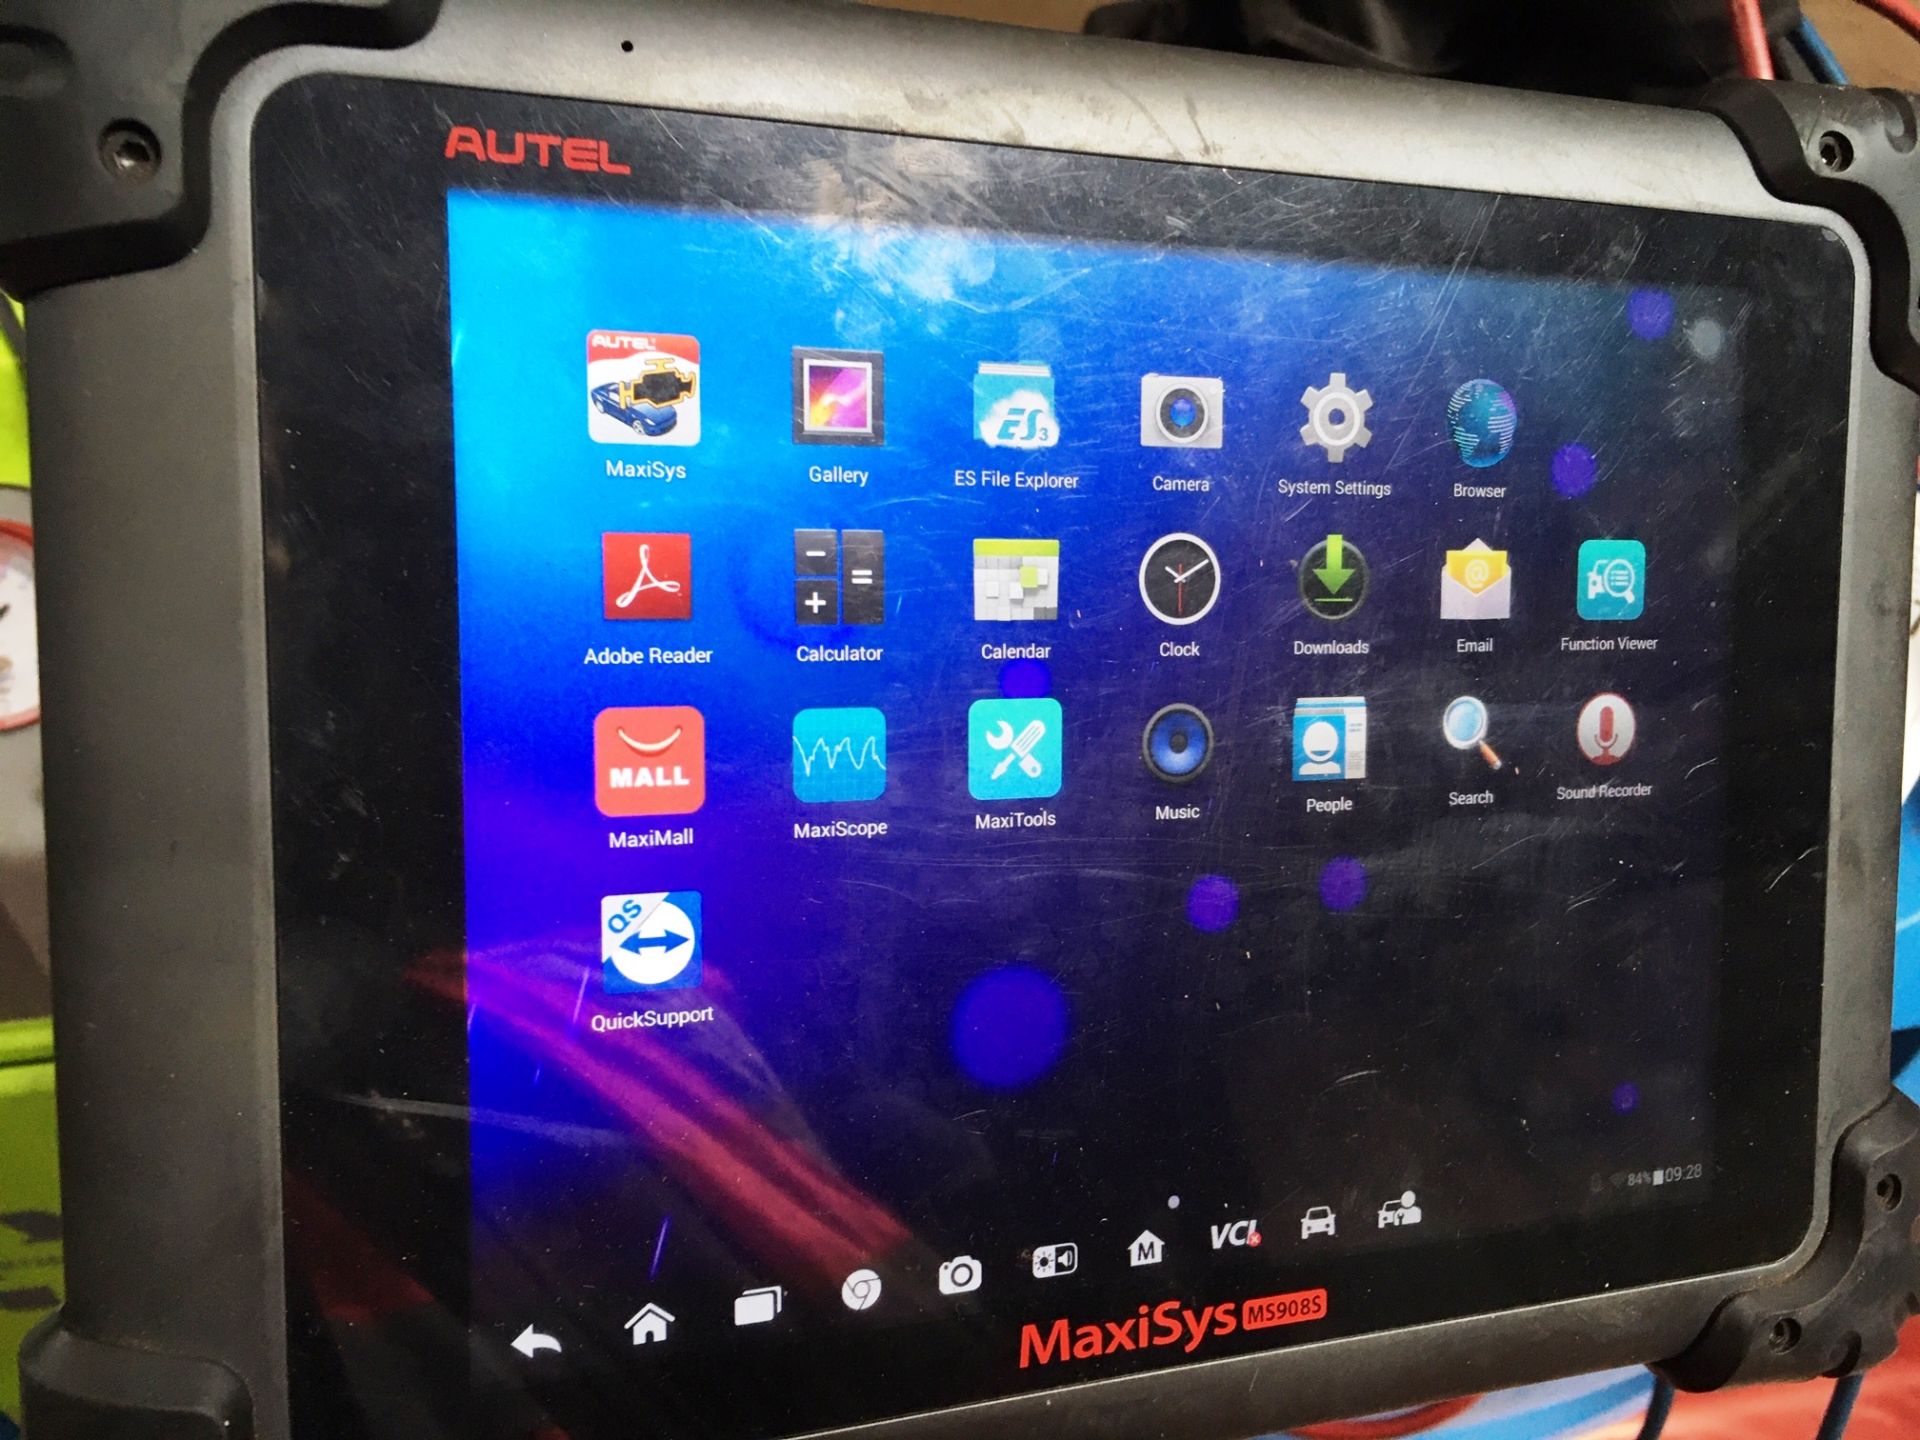 Autel Maxi Sys MS9085 Pro diagnostic touch screen tablet, associated connectors and carry case - Image 5 of 6